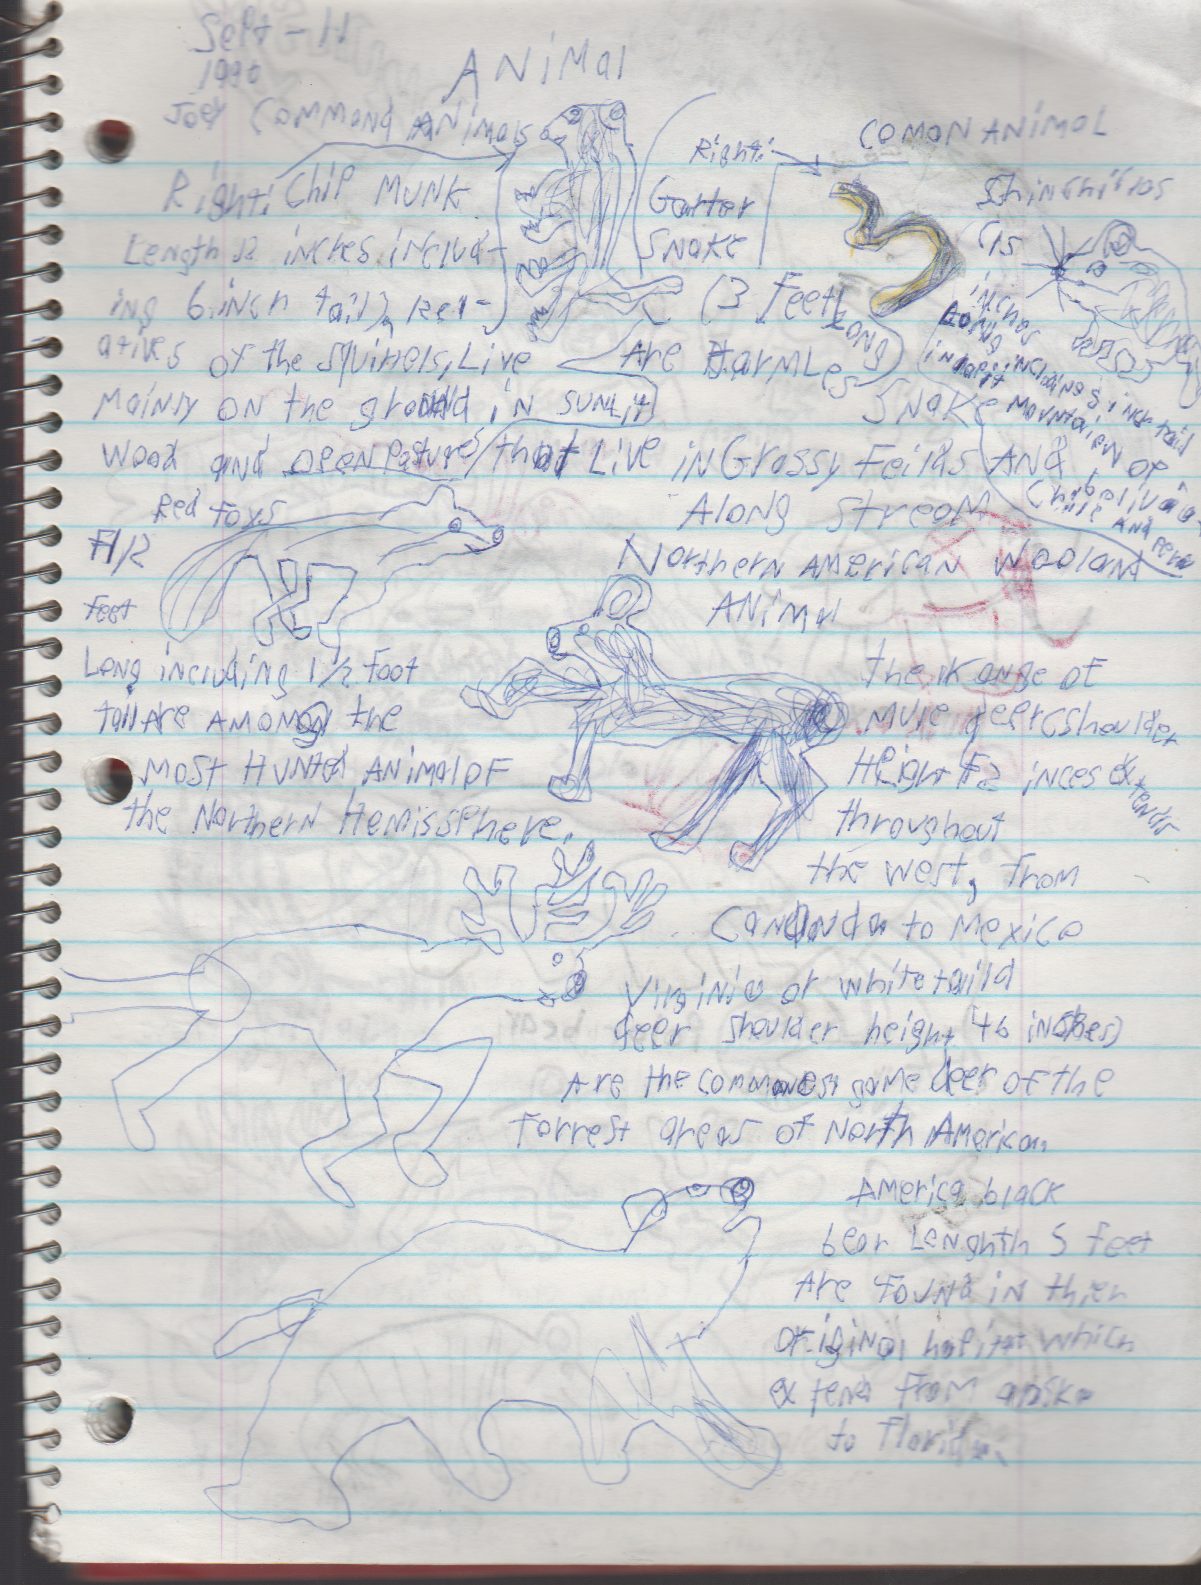 1996-08-18 - Saturday - 11 yr old Joey Arnold's School Book, dates through to 1998 apx, mostly 96, Writings, Drawings, Etc-005.png